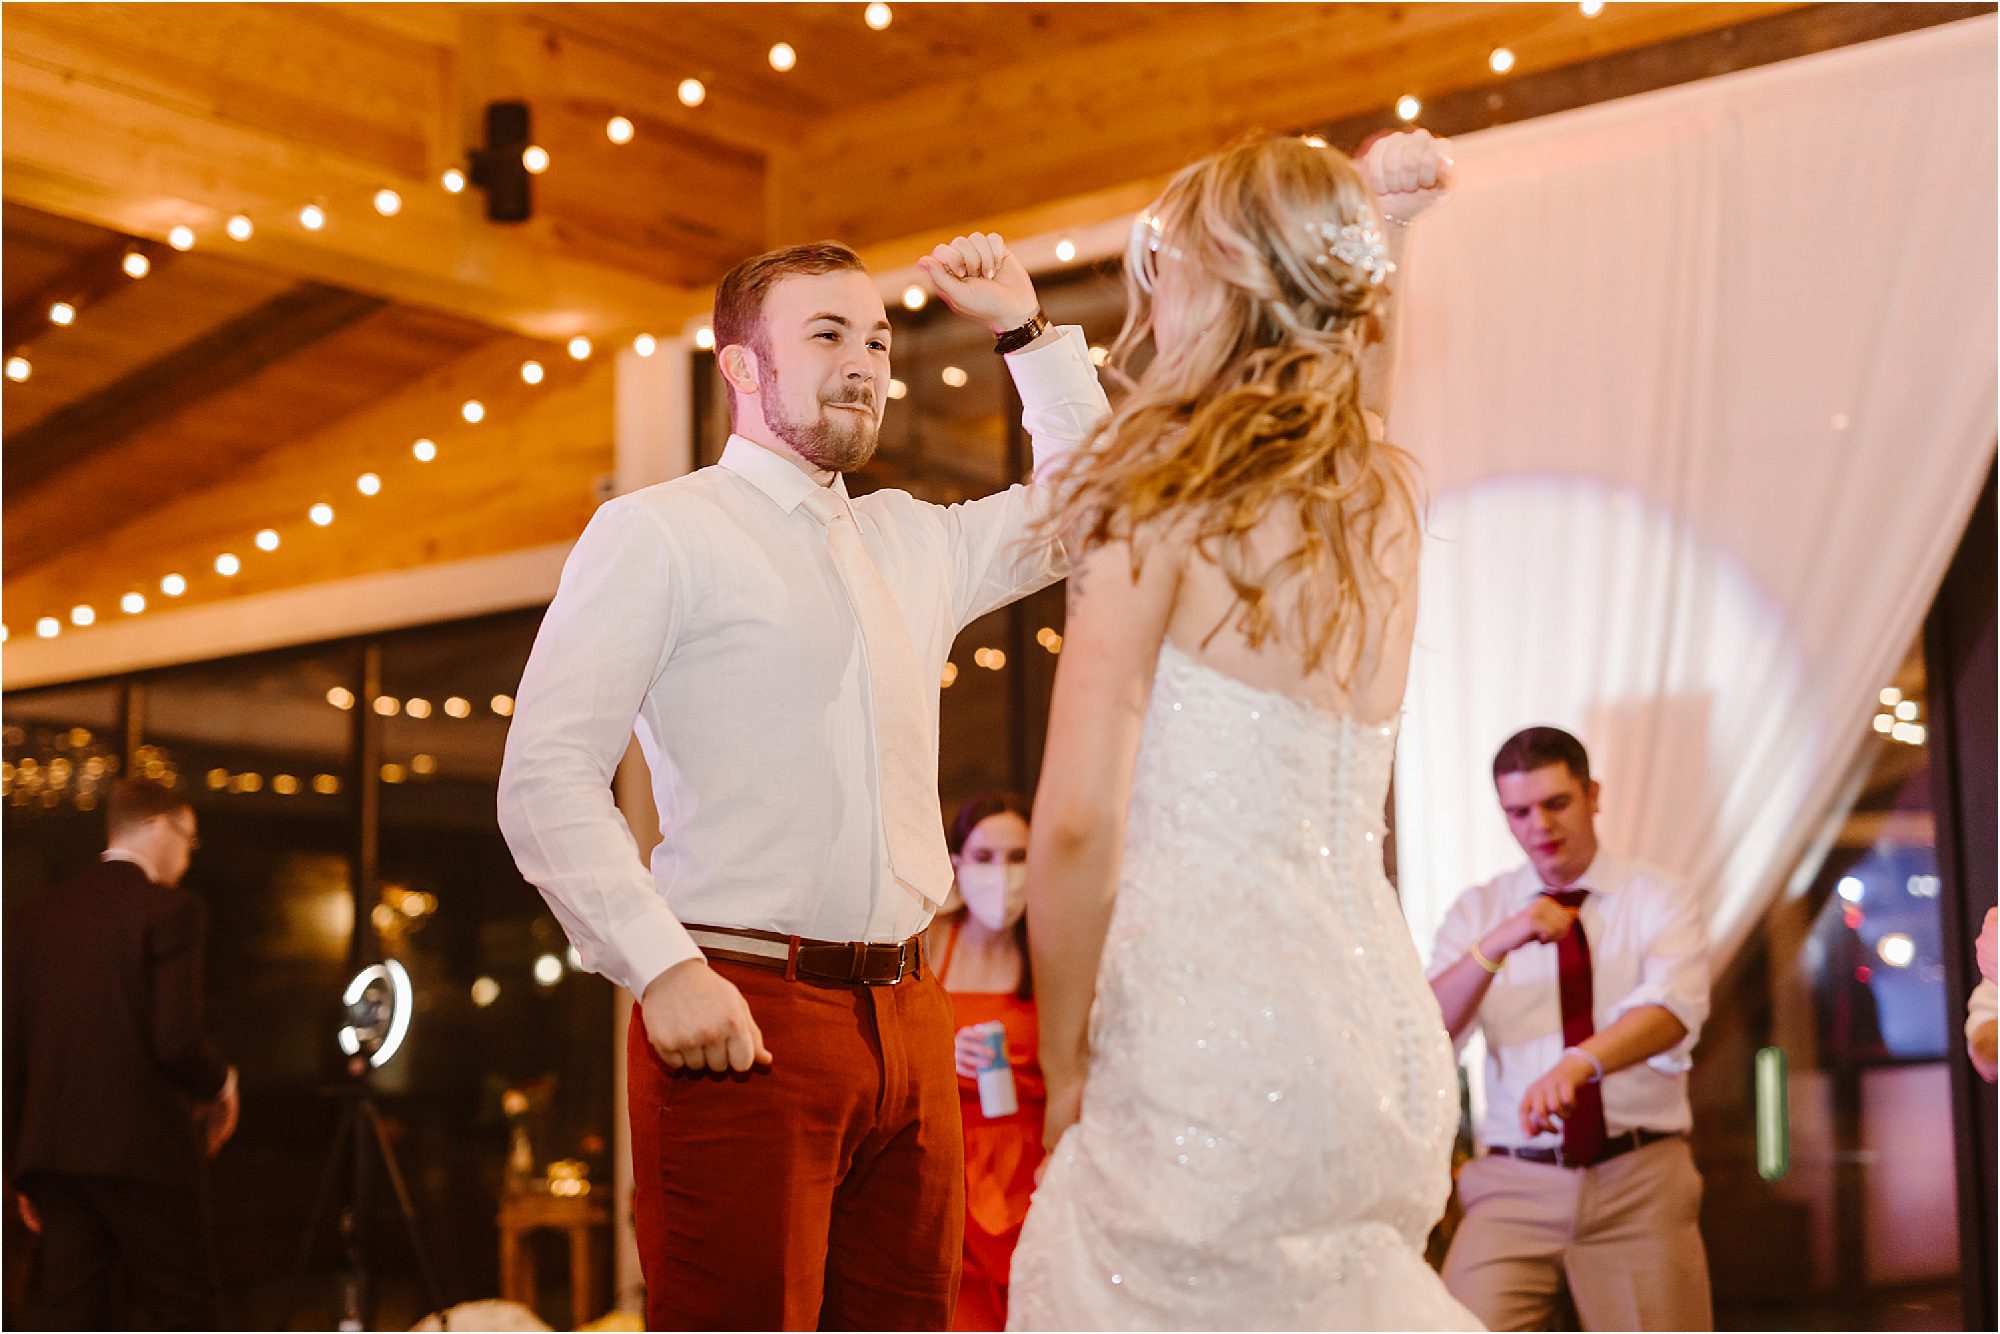 groom and bride jumping up and down at wedding reception dance floor